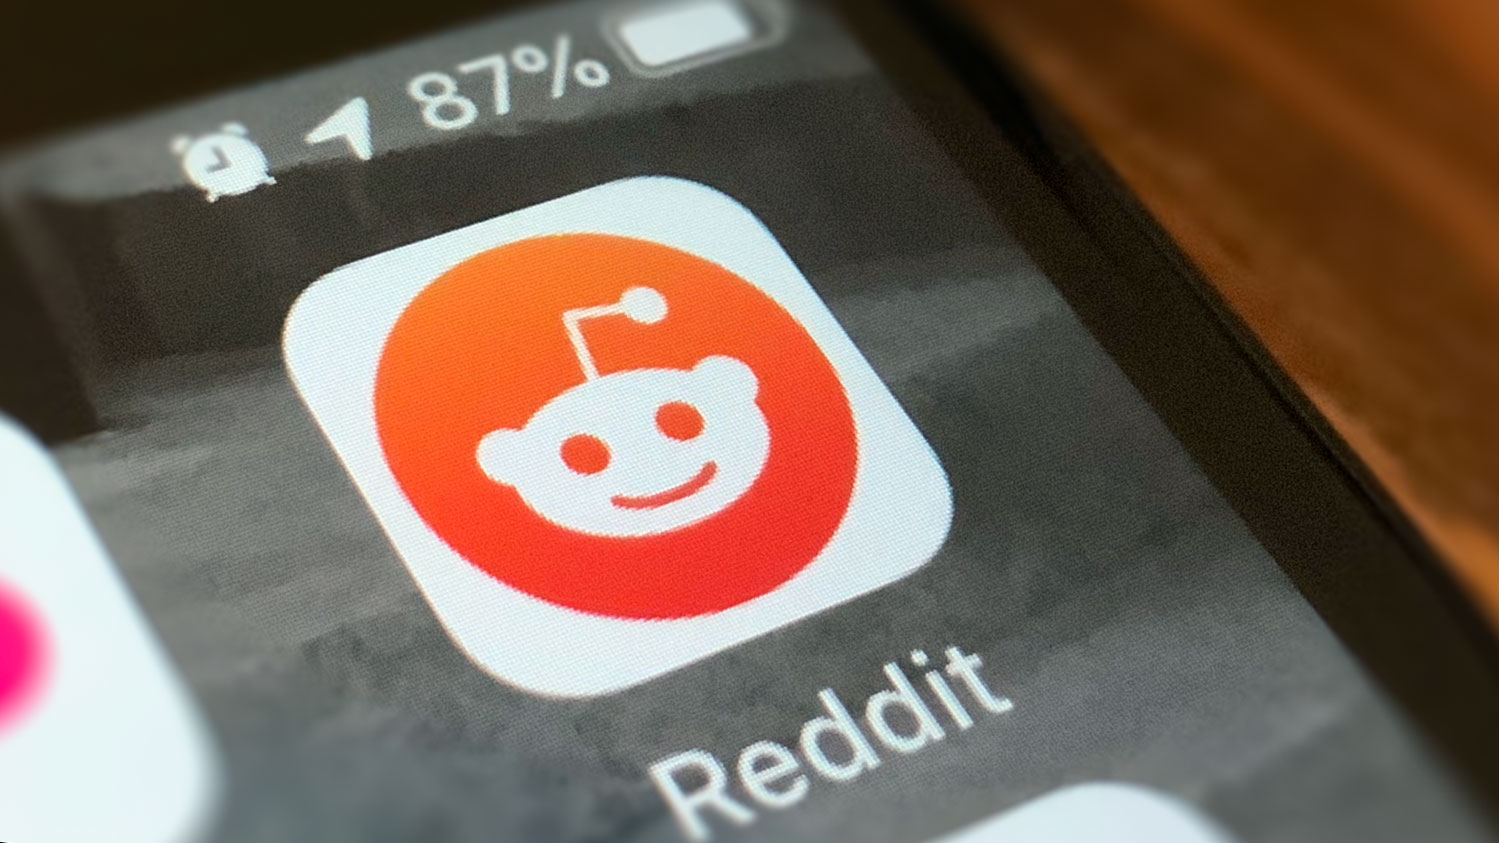 Reddit S Monthly Active User Base Grew 30 To Reach 430m In 2019 Techcrunch,Top 10 Real Estate Markets 2017